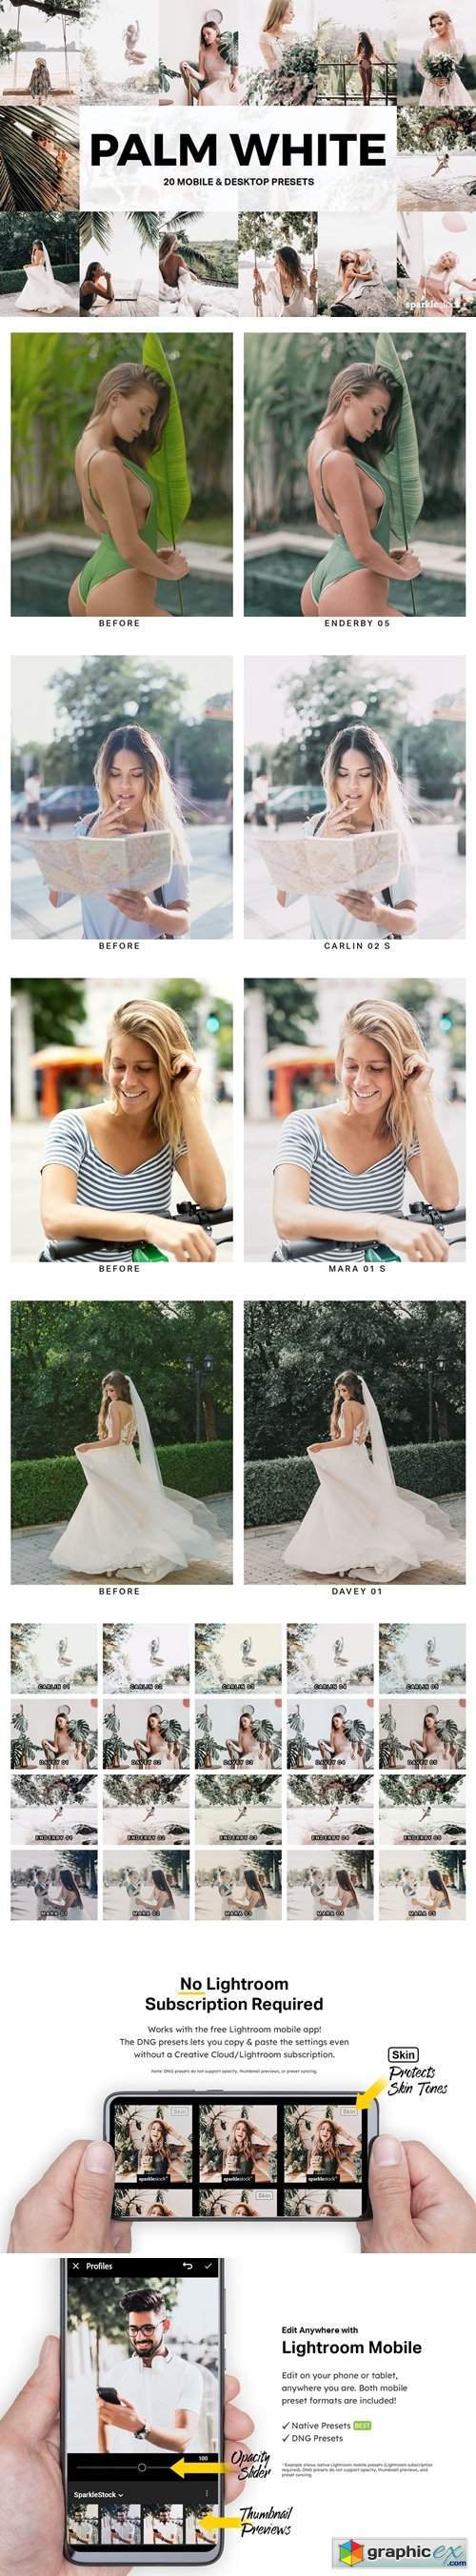 20 Palm White Lightroom Presets and LUTs